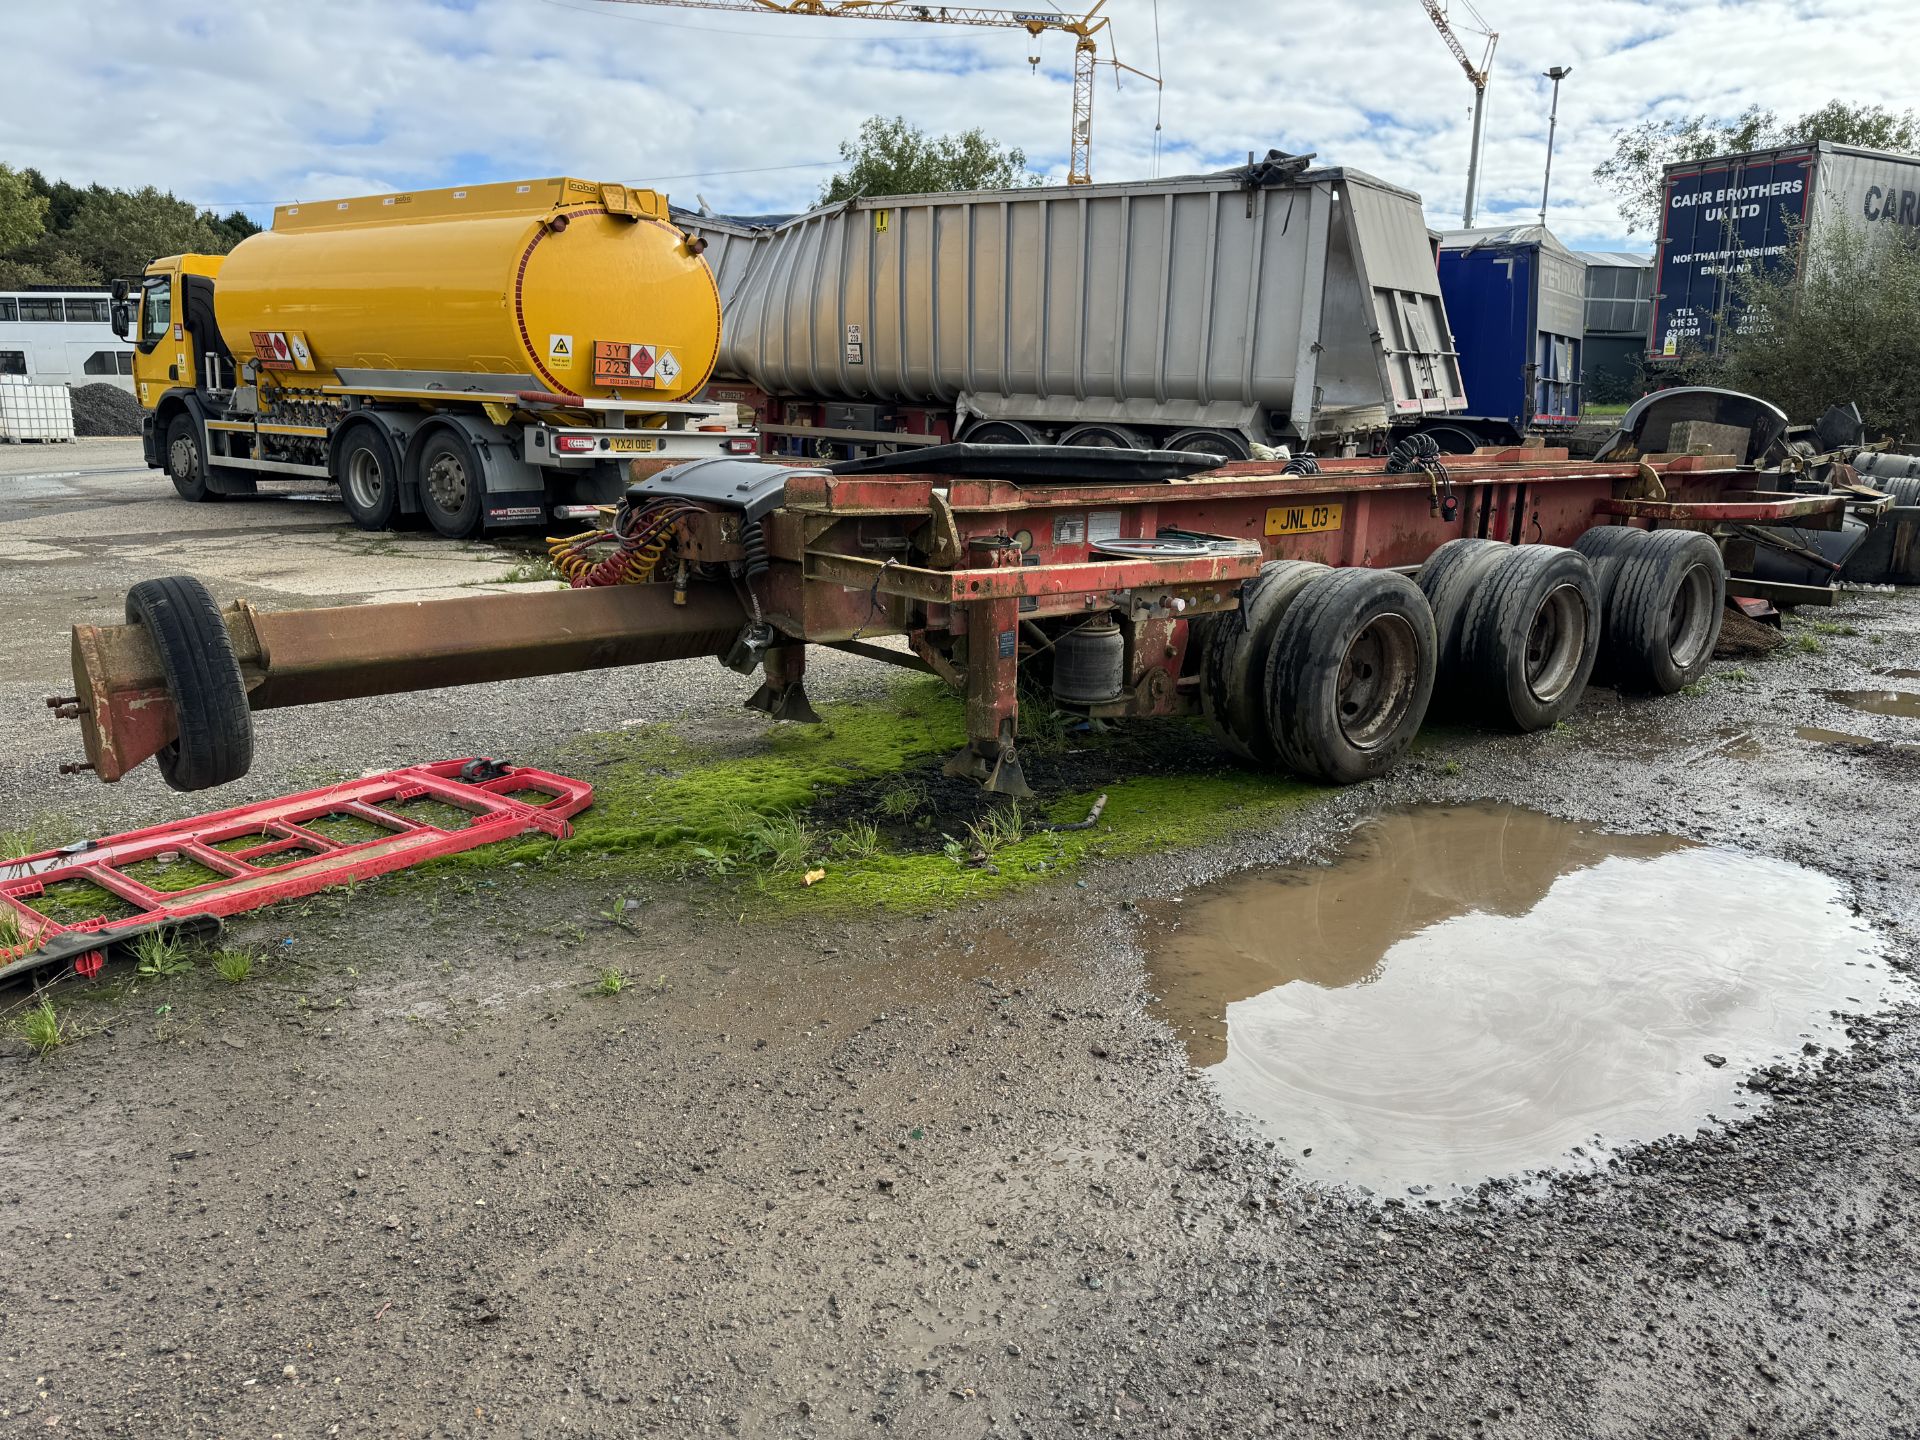 JNL 03 - The Boughton Tri - Axle Trailer, Sold for Spares